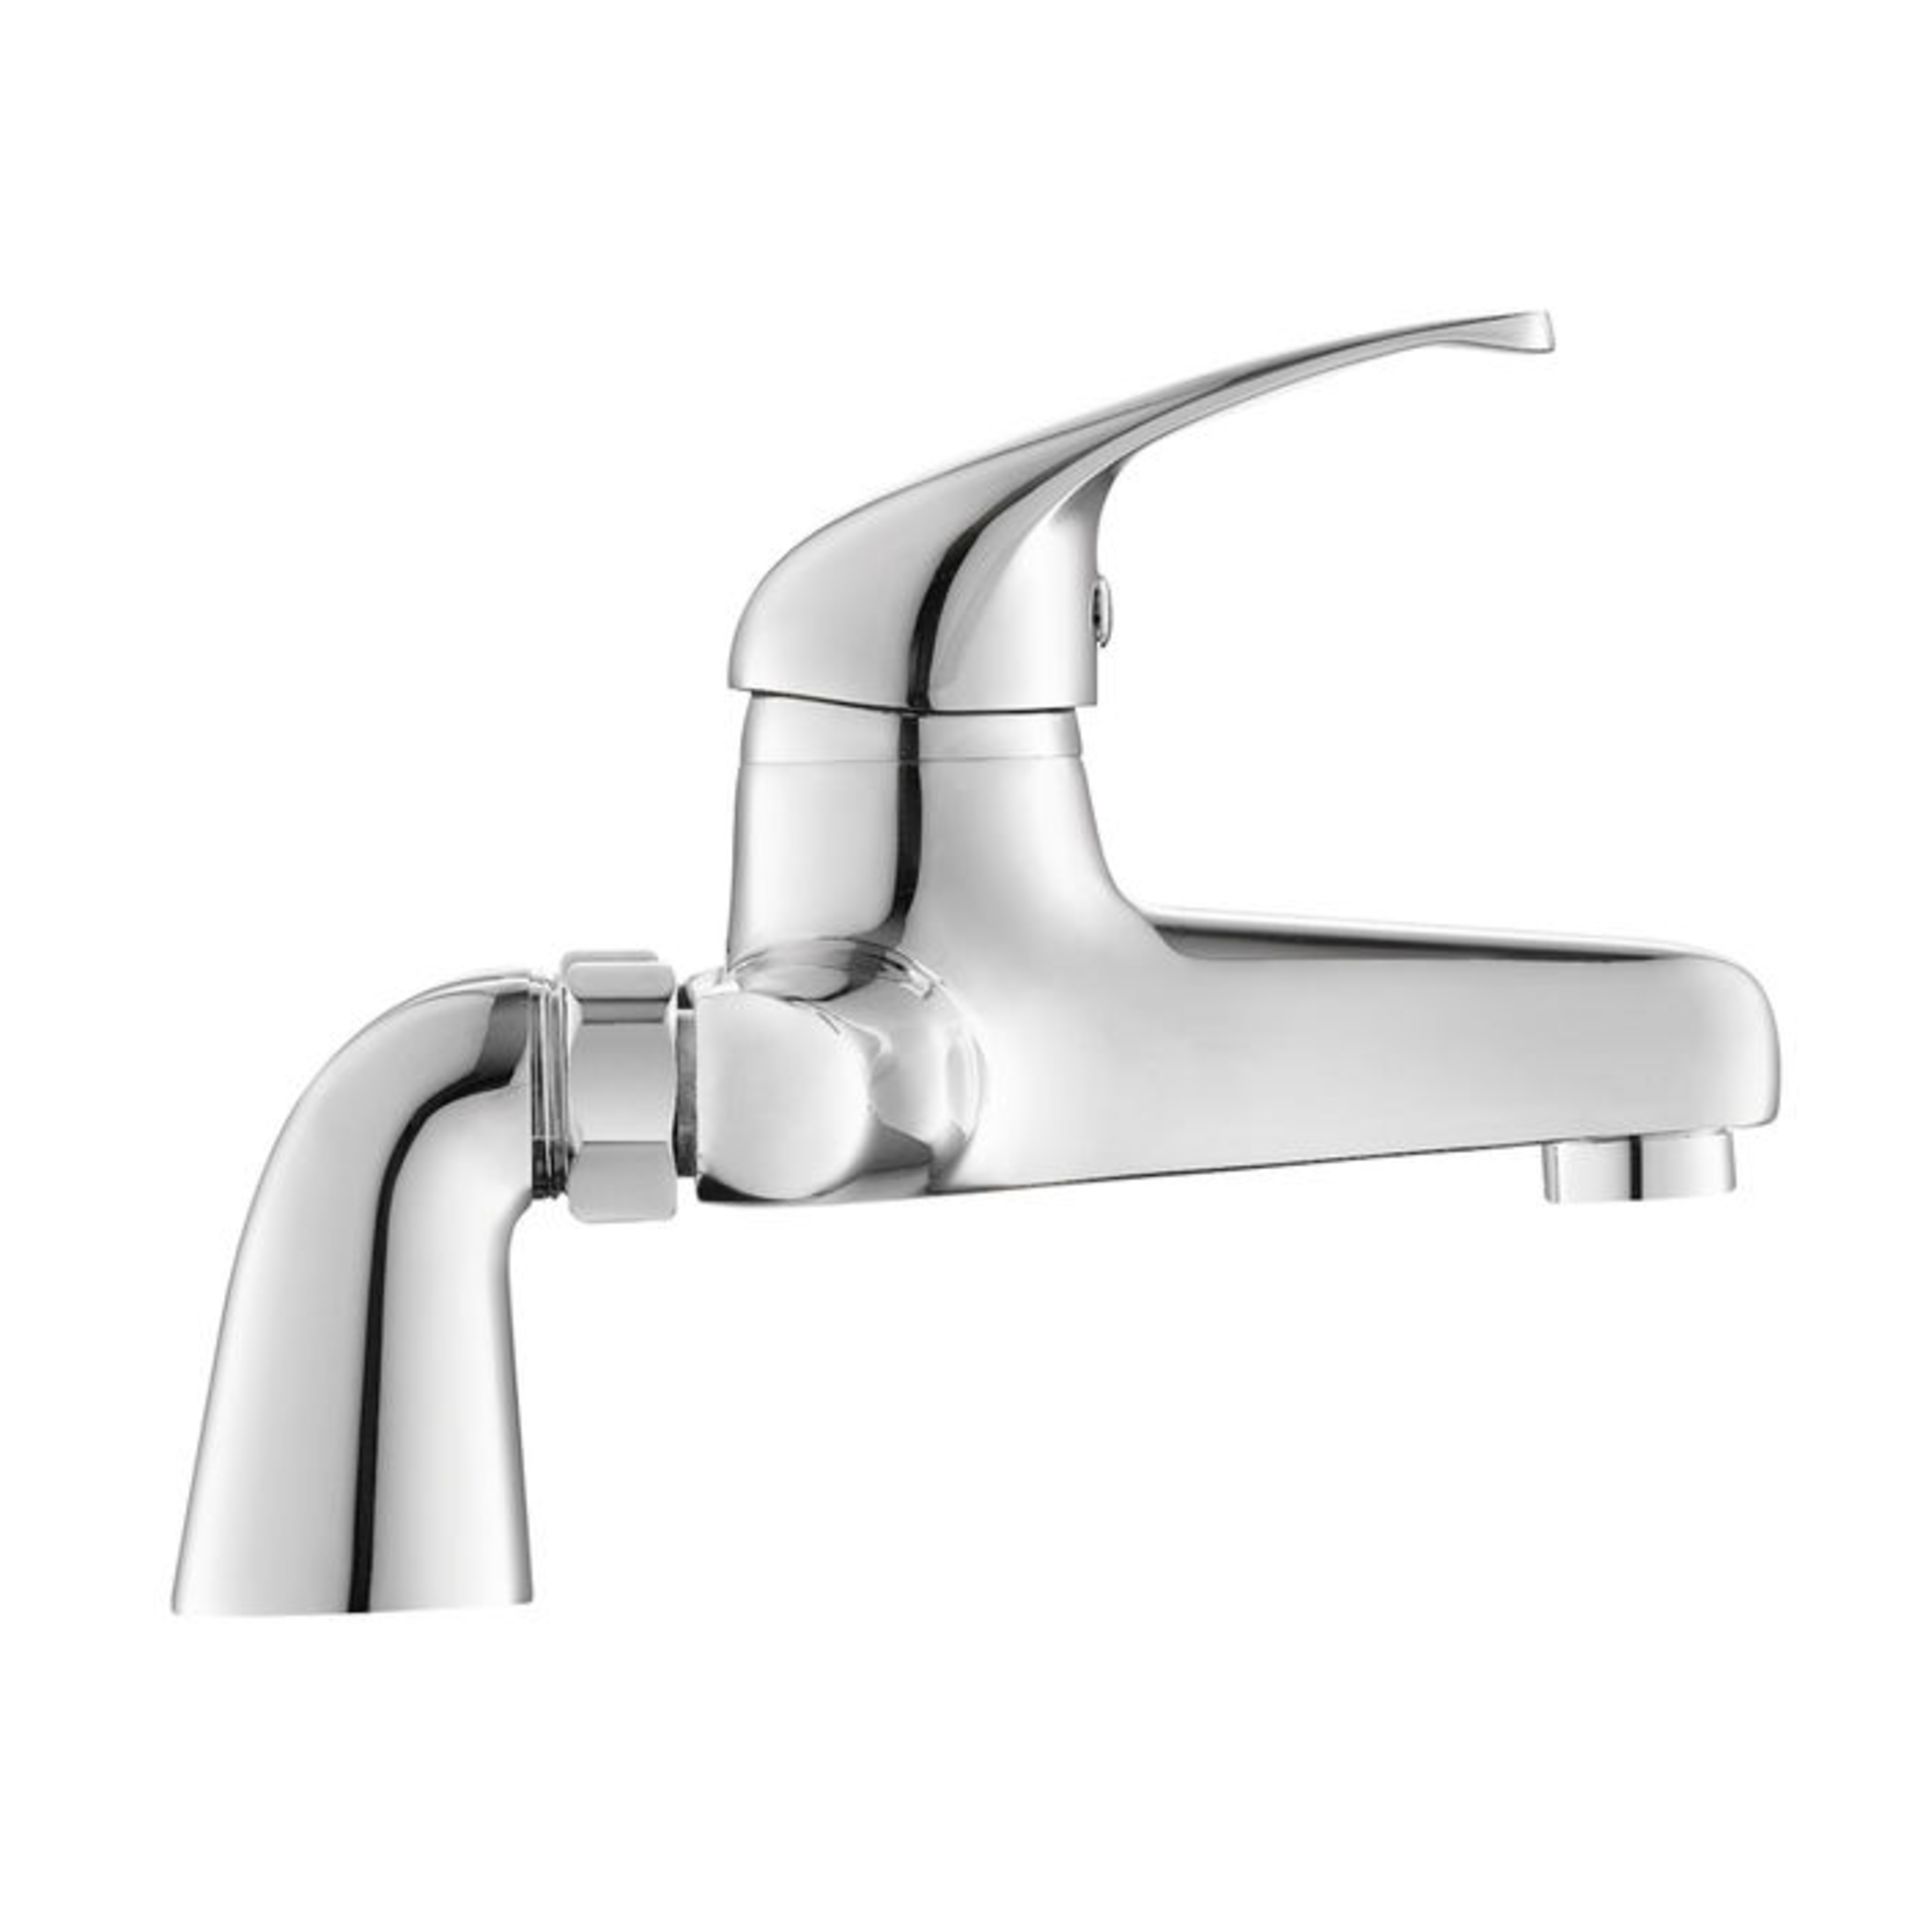 (V4) Sleek Bath Filler Mixer Tap. Chrome Plated Solid Brass 1/4 turn solid brass valve with - Image 2 of 3